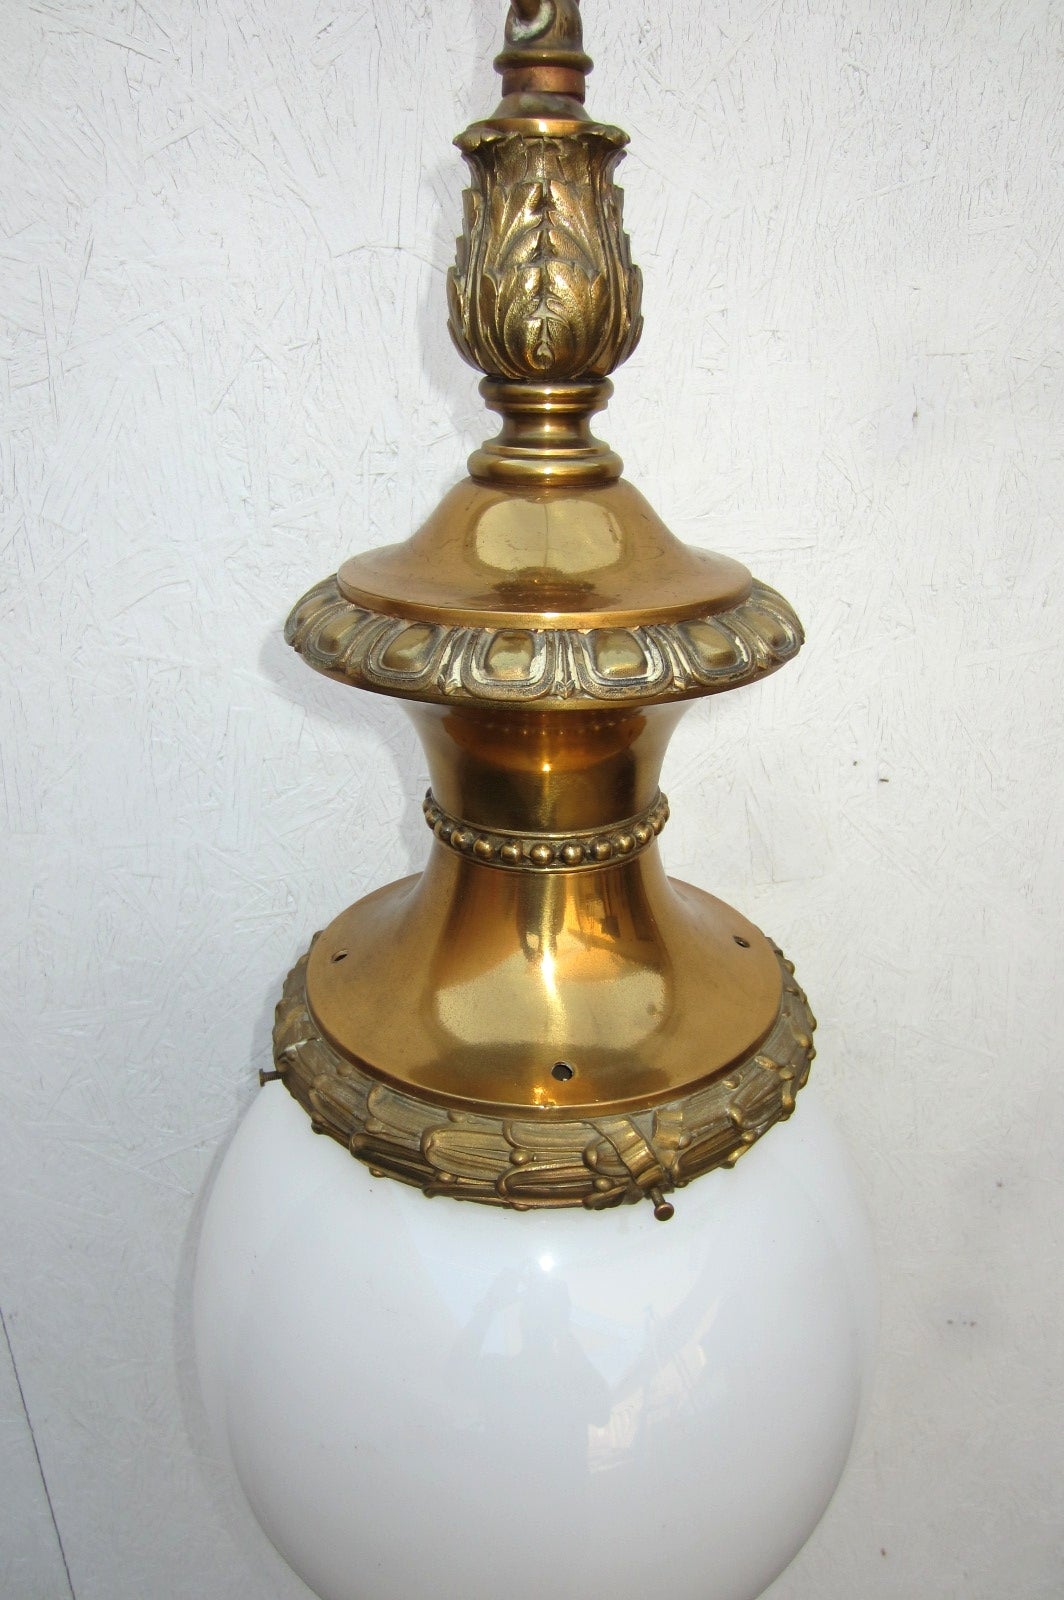 Early 1900s huge bronze and milk glass ball auditorium pendant lamp.
Beautiful detail and craftsmanship. Handblown milk glass ball shade (basketball size+).
Provenance, from a Masonic Lodge reading room in Cleveland, OH.
Not marked or signed by